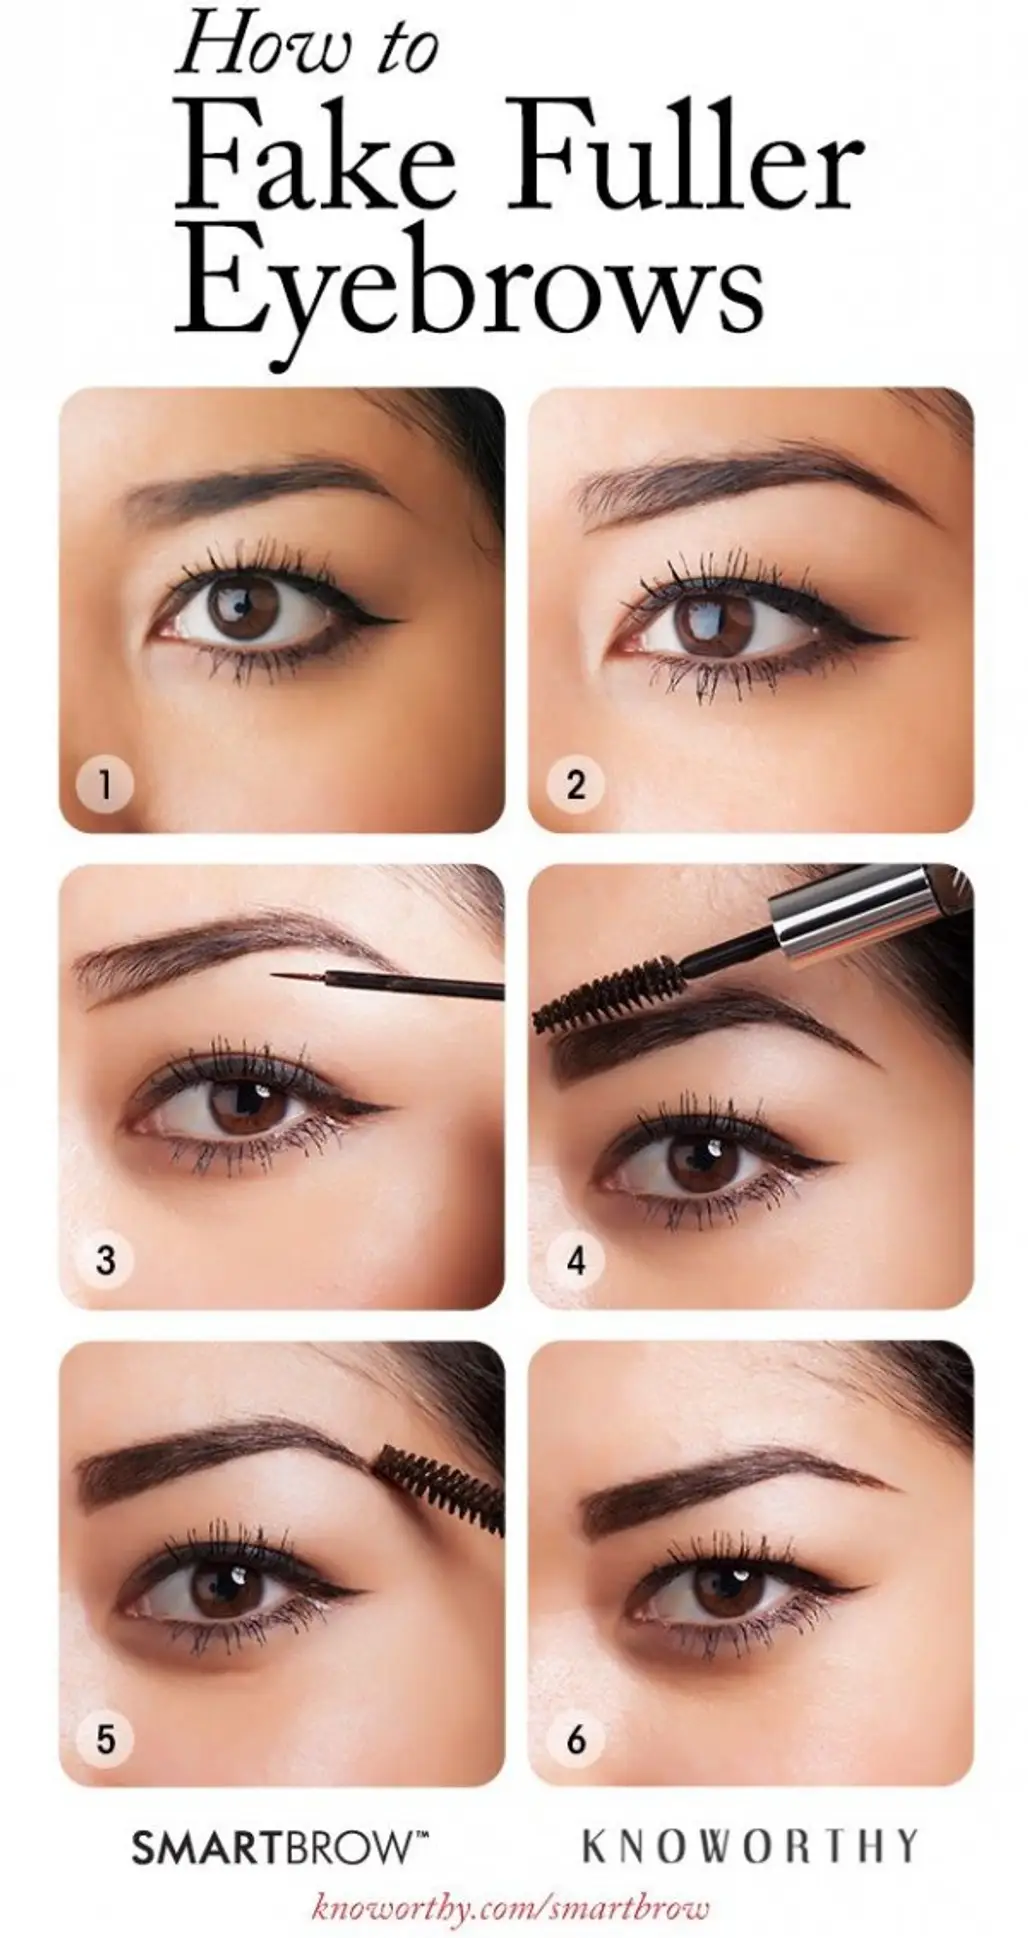 How to Fake Fuller Eyebrows in 6 Easy Steps